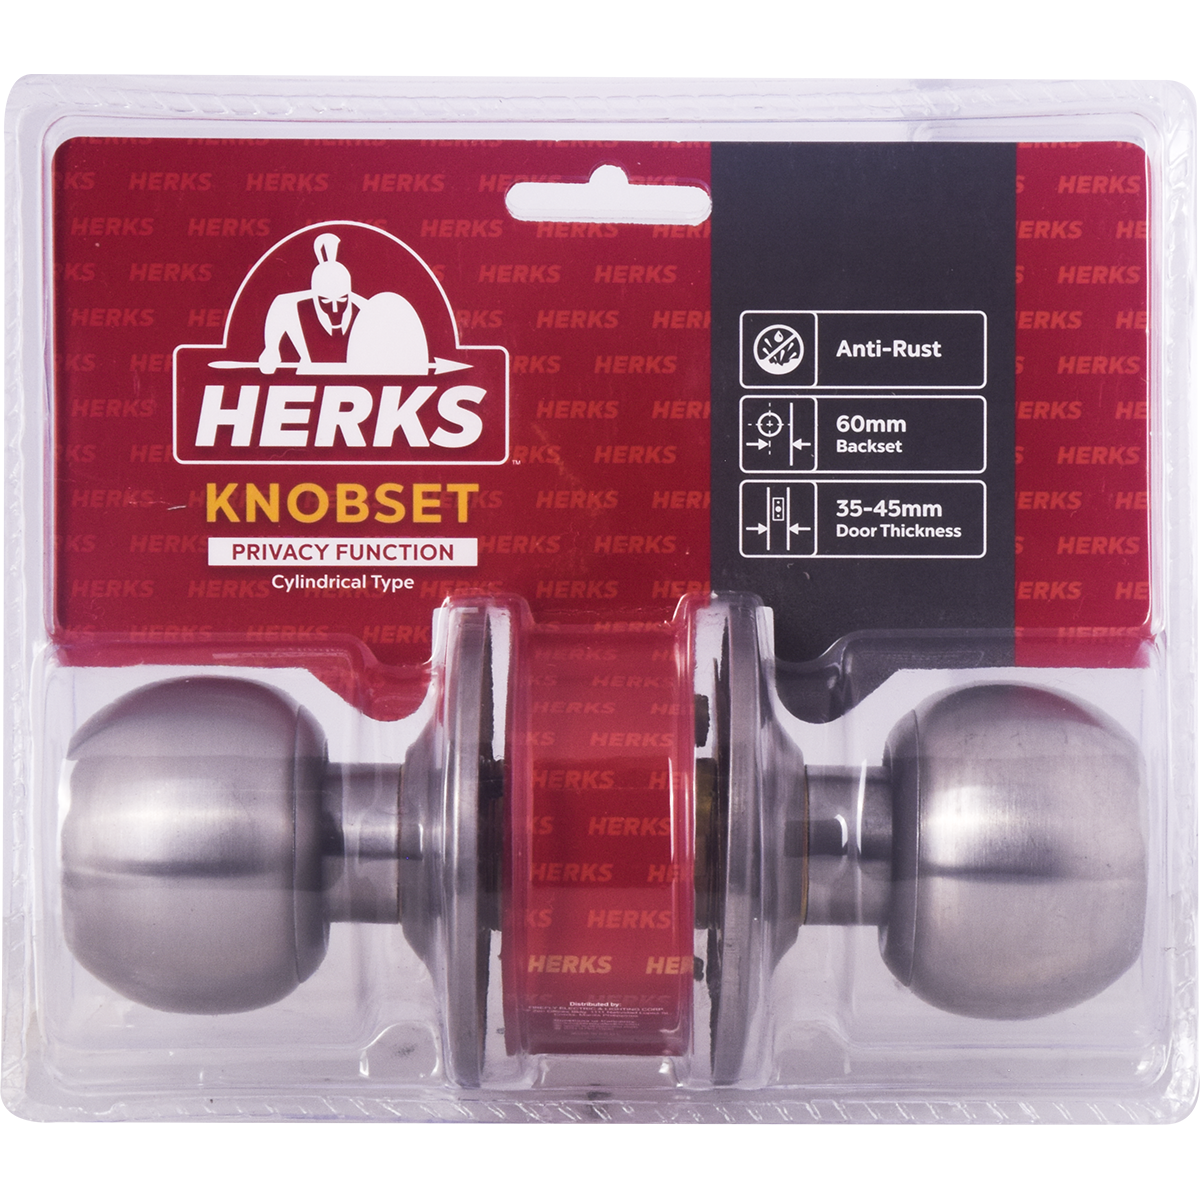 HERKS 587 Cylindrical Knobset Privacy Function - Round Design